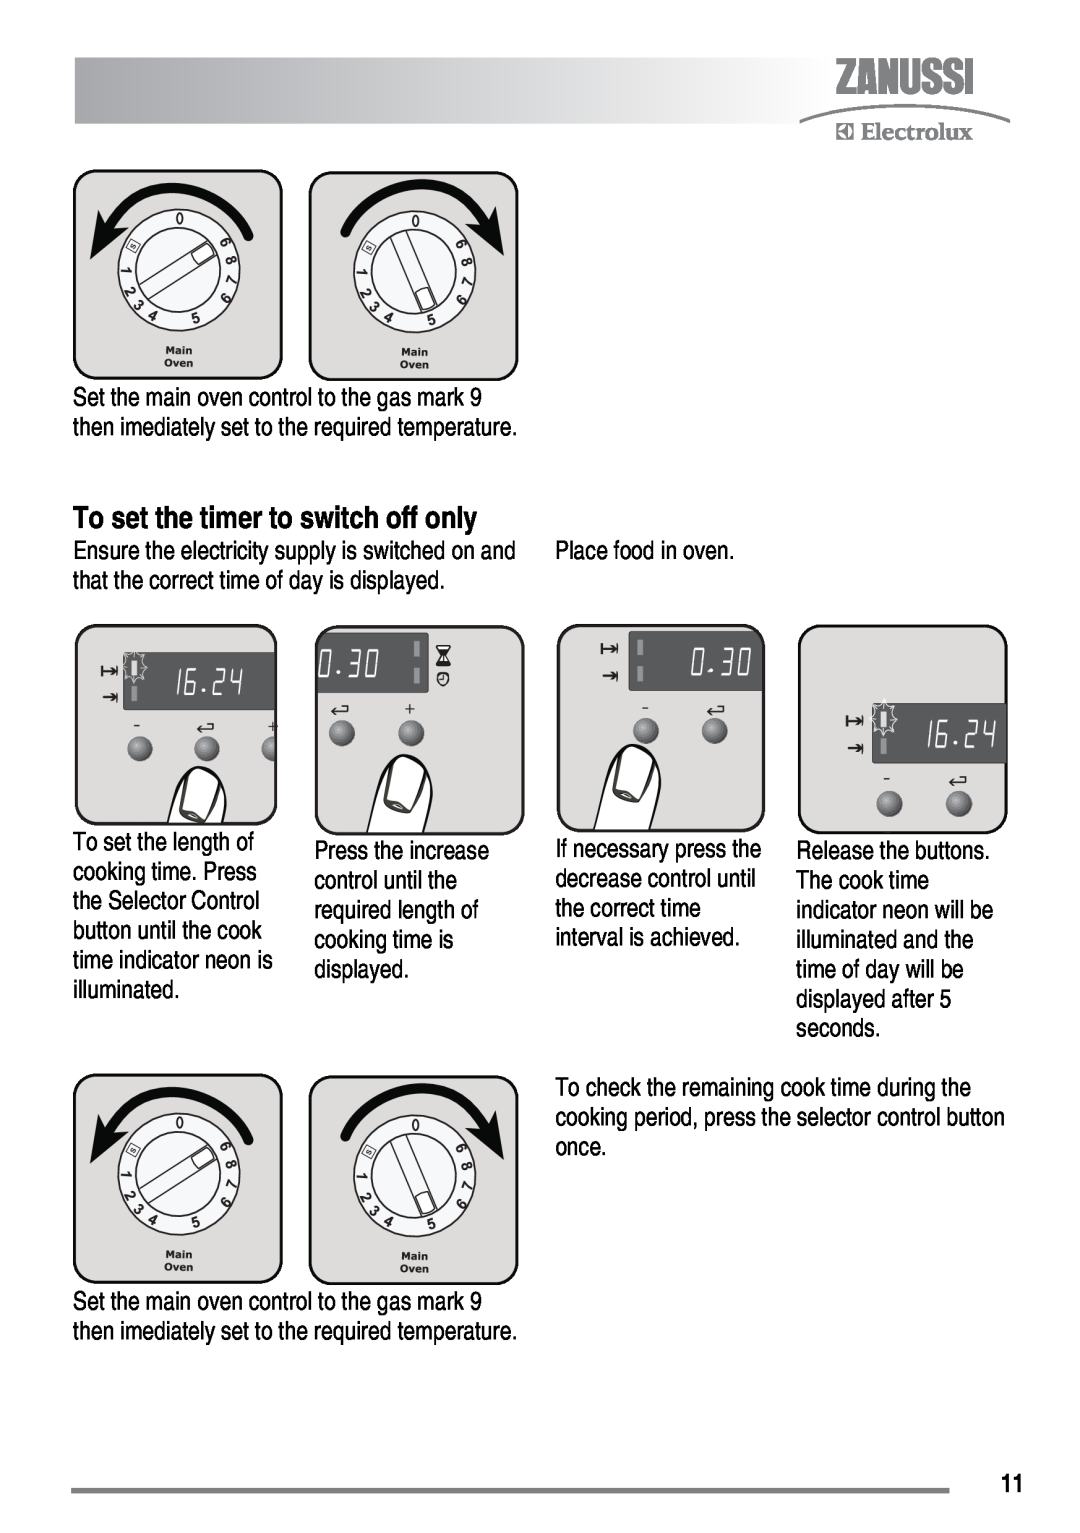 Zanussi FH10 user manual To set the timer to switch off only, that the correct time of day is displayed 